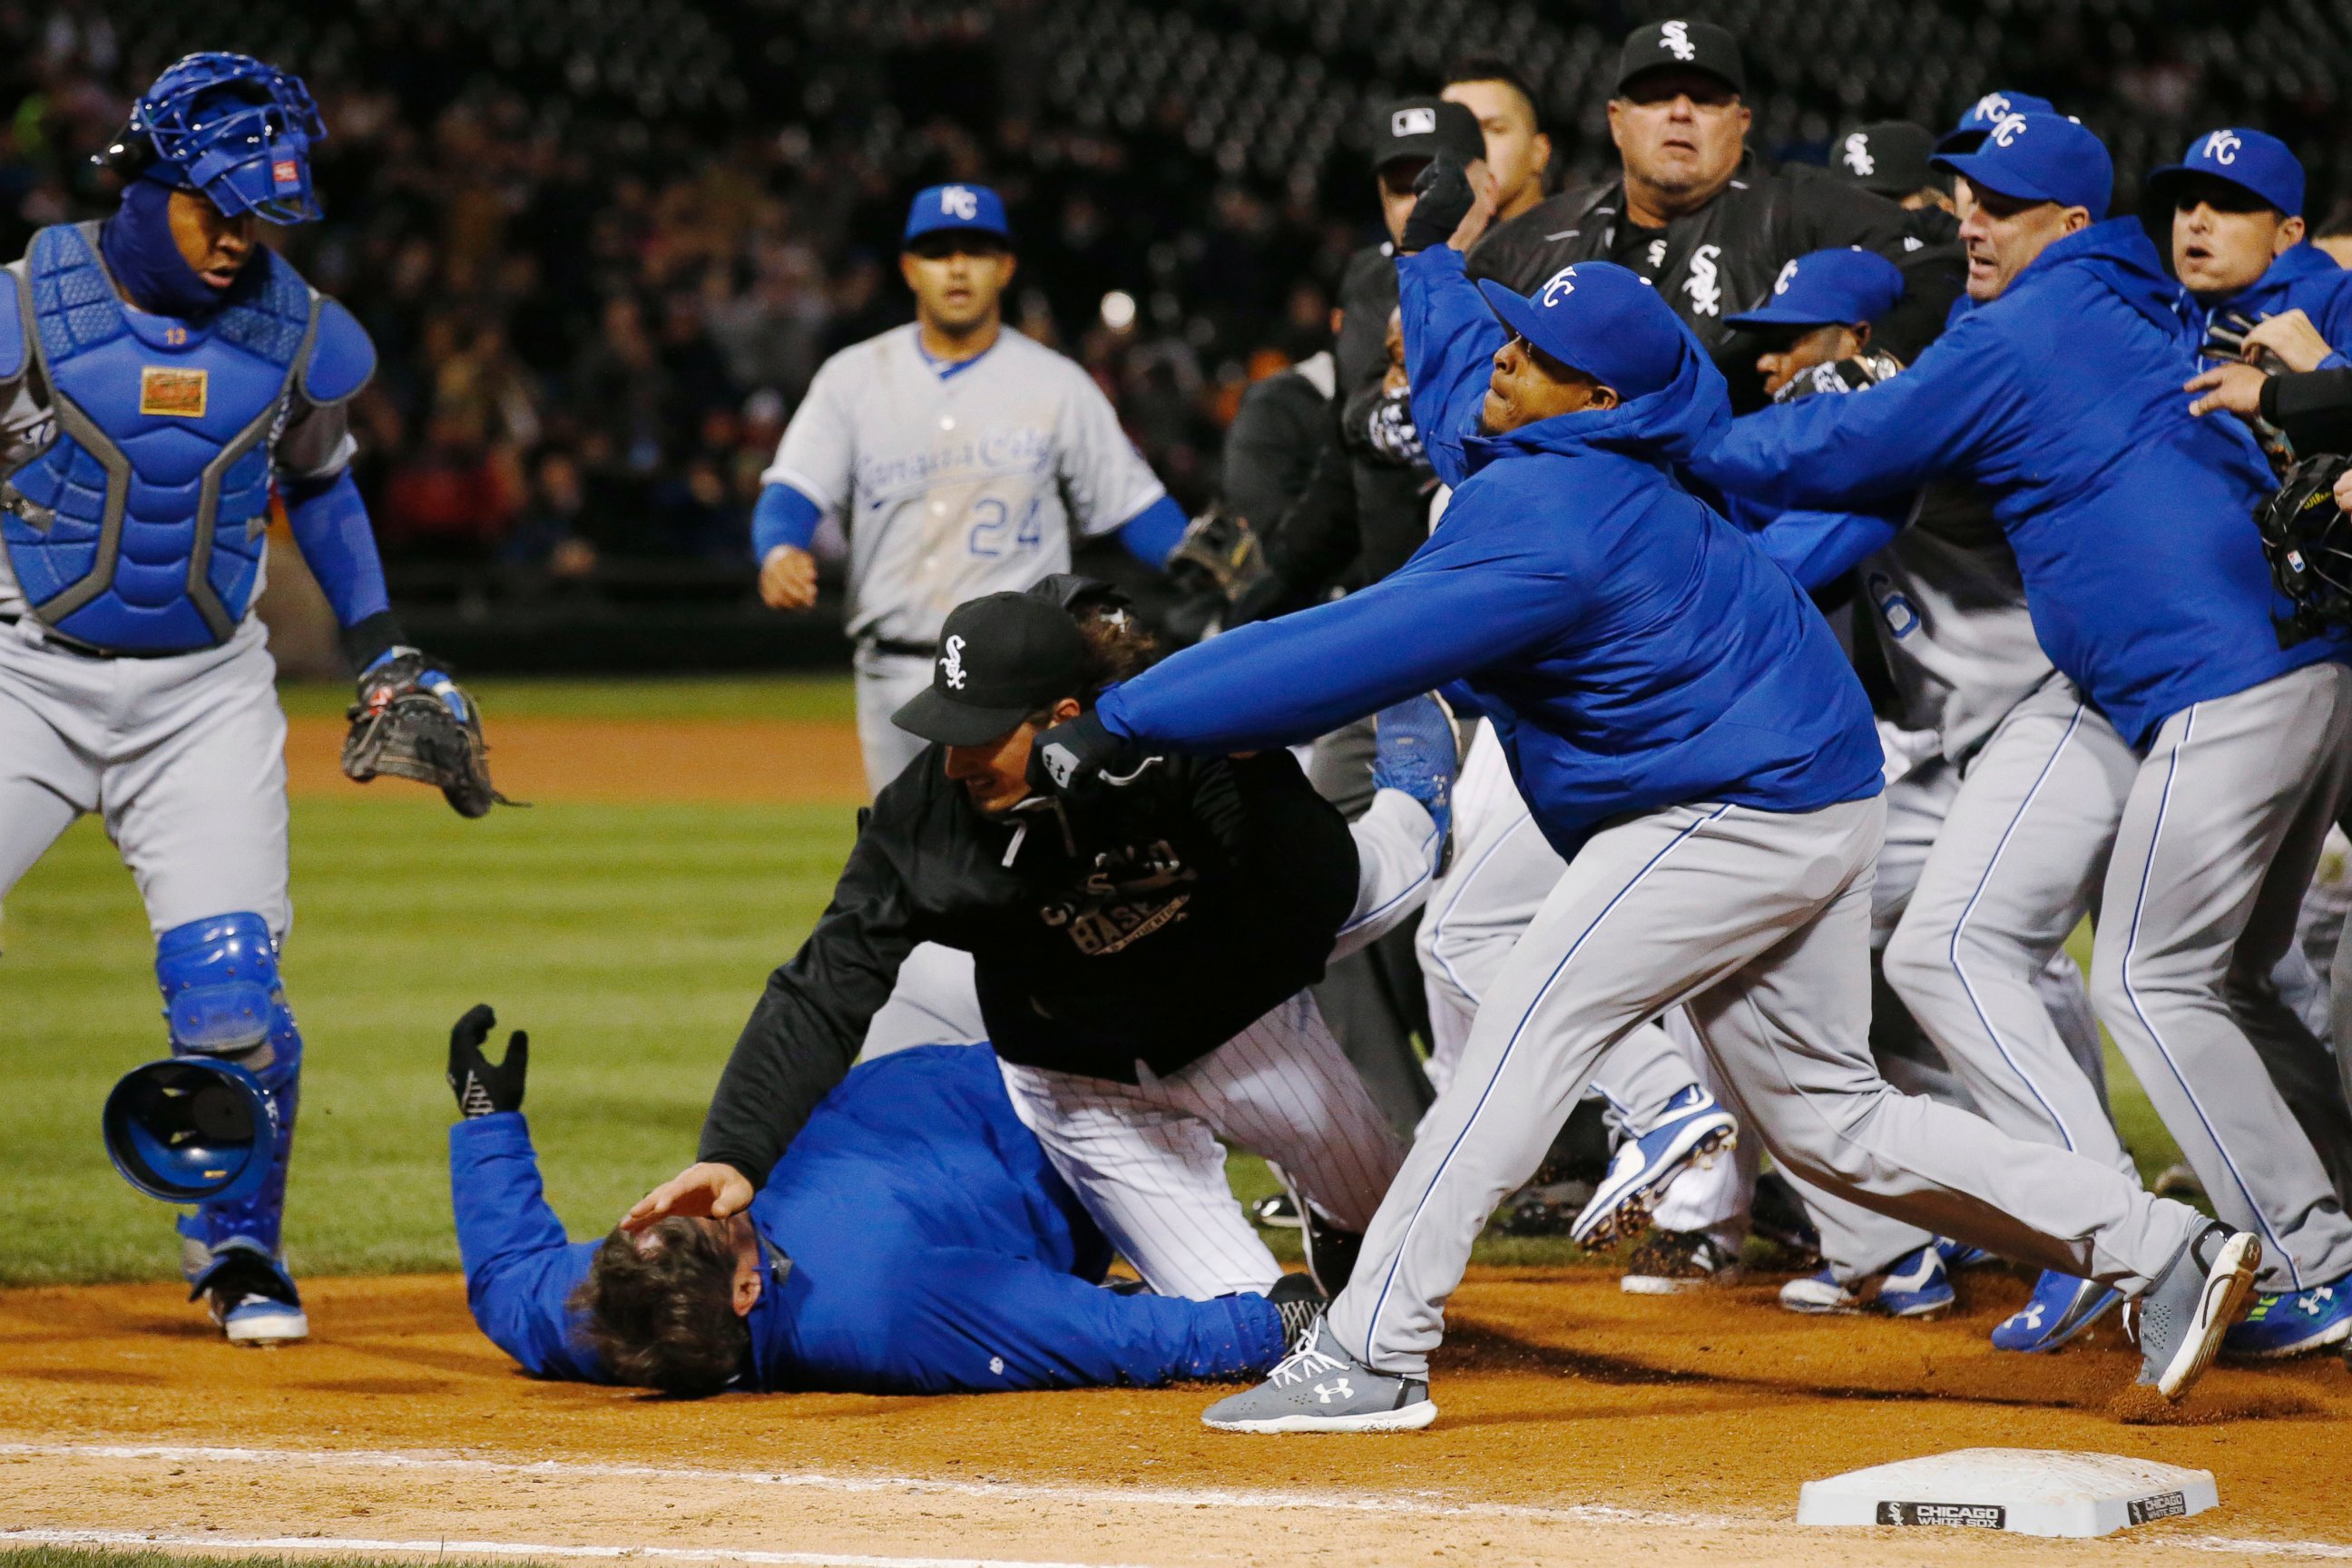 PHOTO: Chicago White Sox's Jeff Samardzija, center, tussles with Kansas City Royals players during the seventh inning of a baseball game, April 23, 2015, in Chicago.